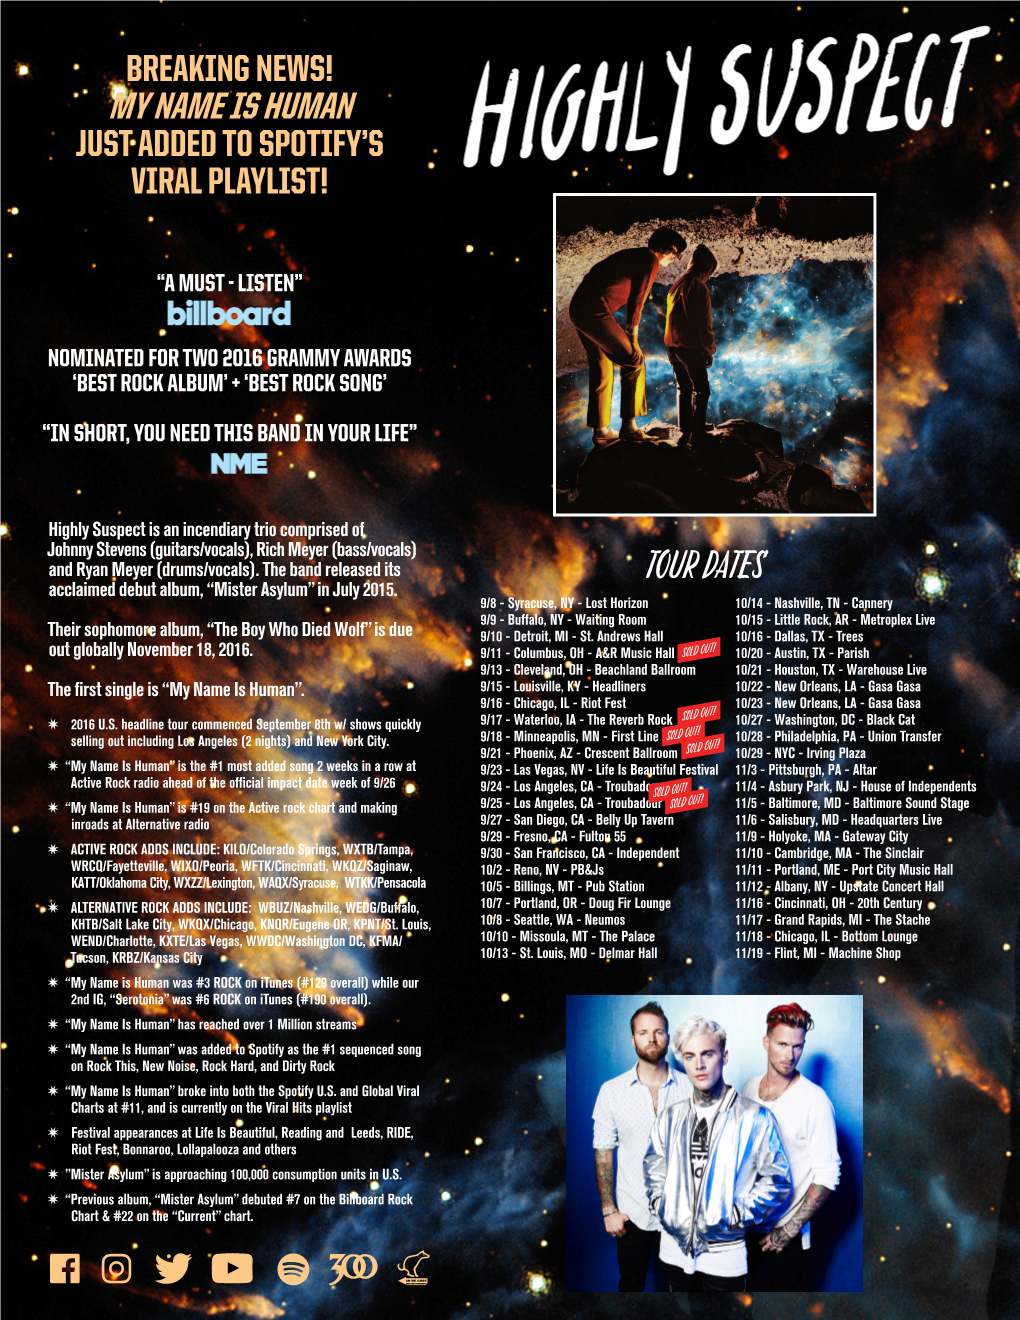 Tour DATES Acclaimed Debut Album, “Mister Asylum” in July 2015